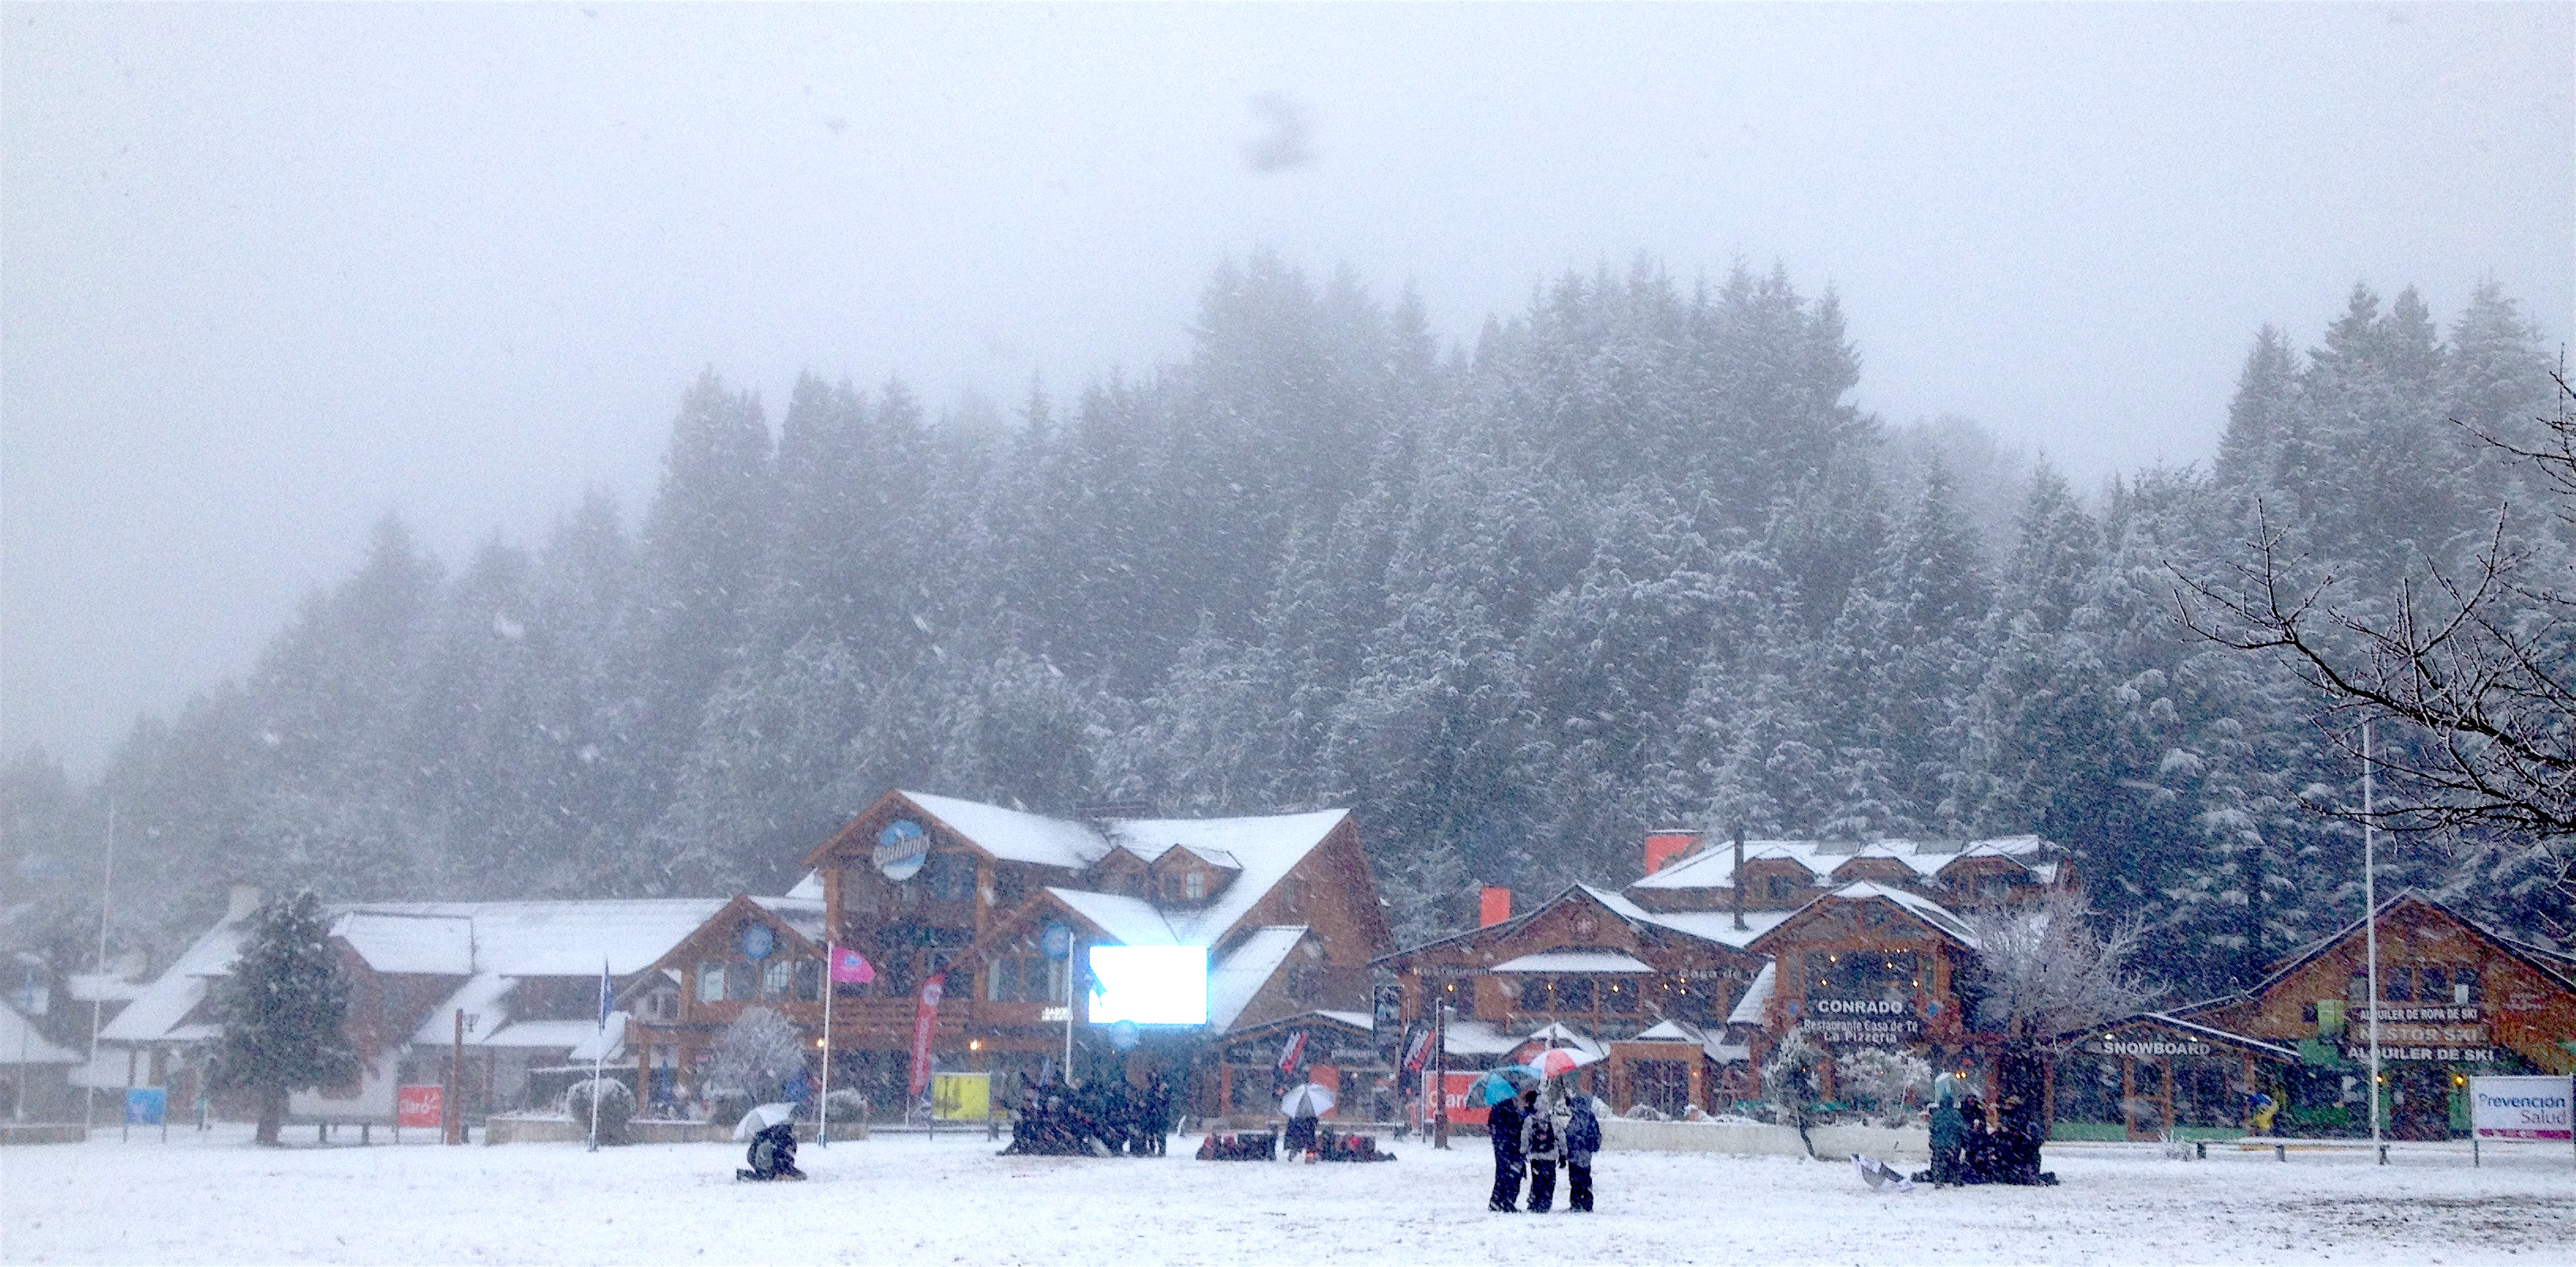 Snowing full on at the Cerro Catedral base today. photo: miles clark/snowbrains